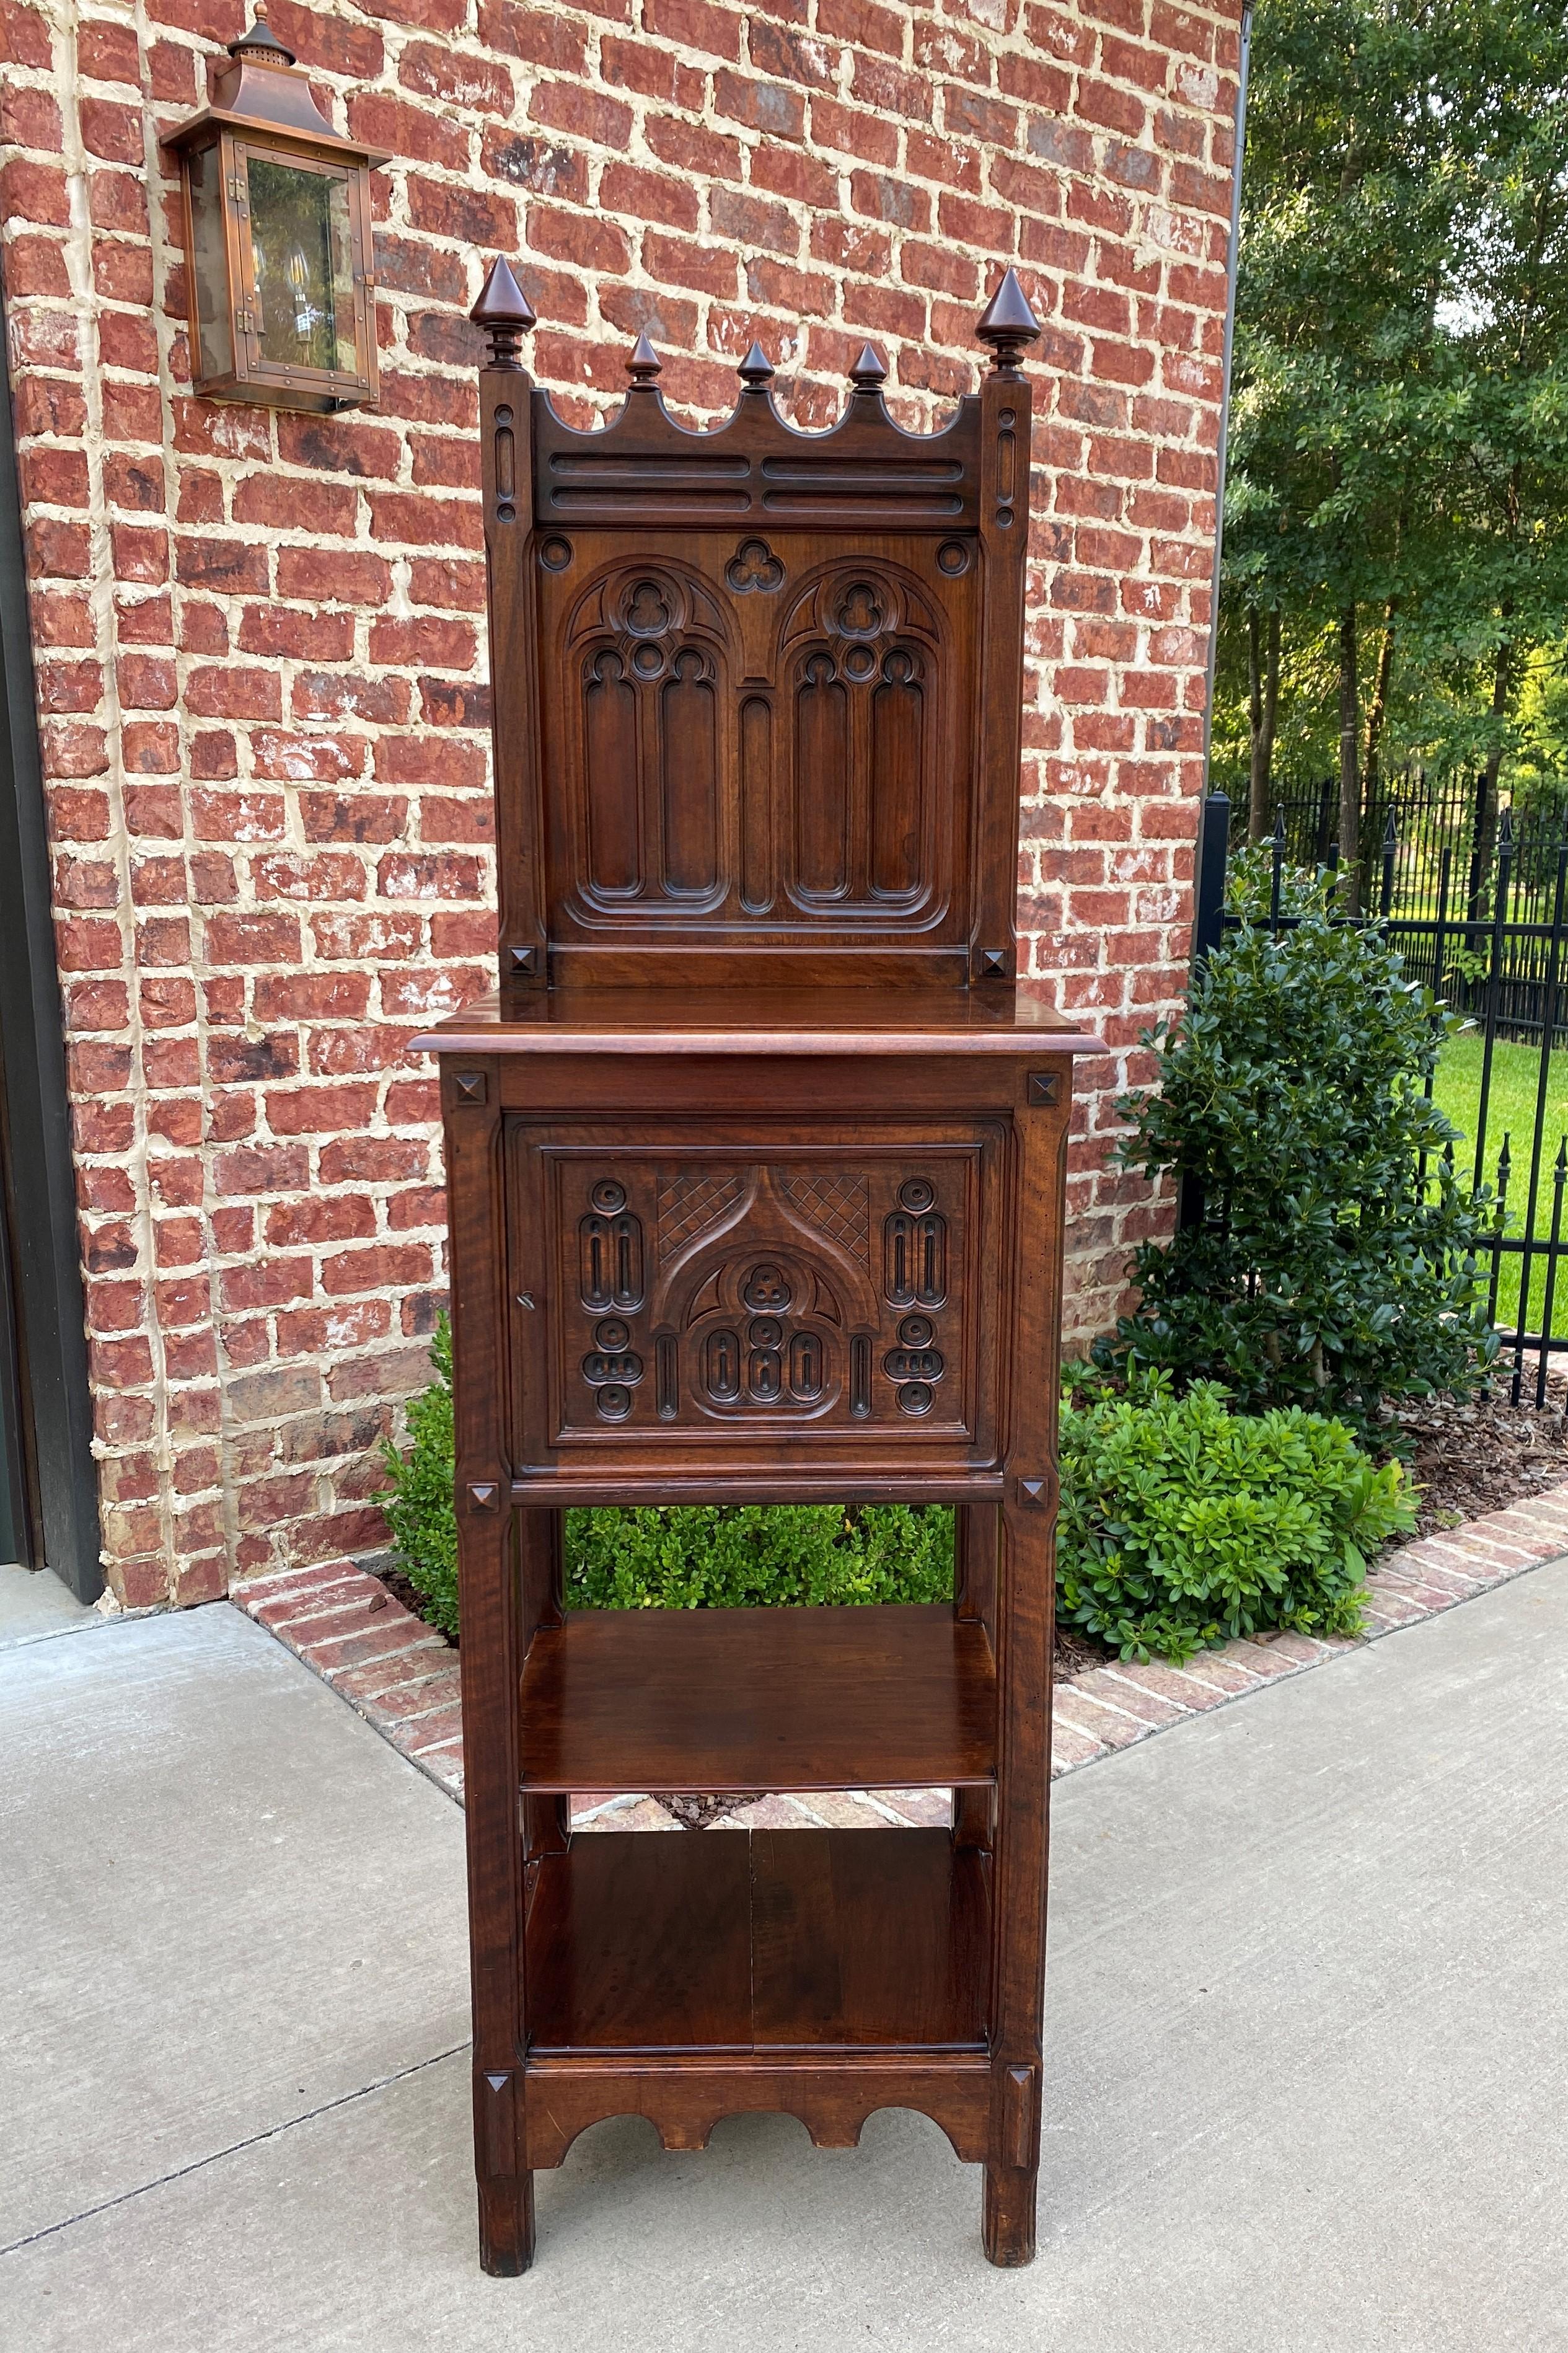 Antique French Gothic Revival carved walnut cabinet, bar, pedestal~~Petite~~c. 1890s-1900

Charming antique cabinet in popular French Gothic Revival style~~carved tracery, quatrefoil and spire accents~~interior cabinet for storage and two lower